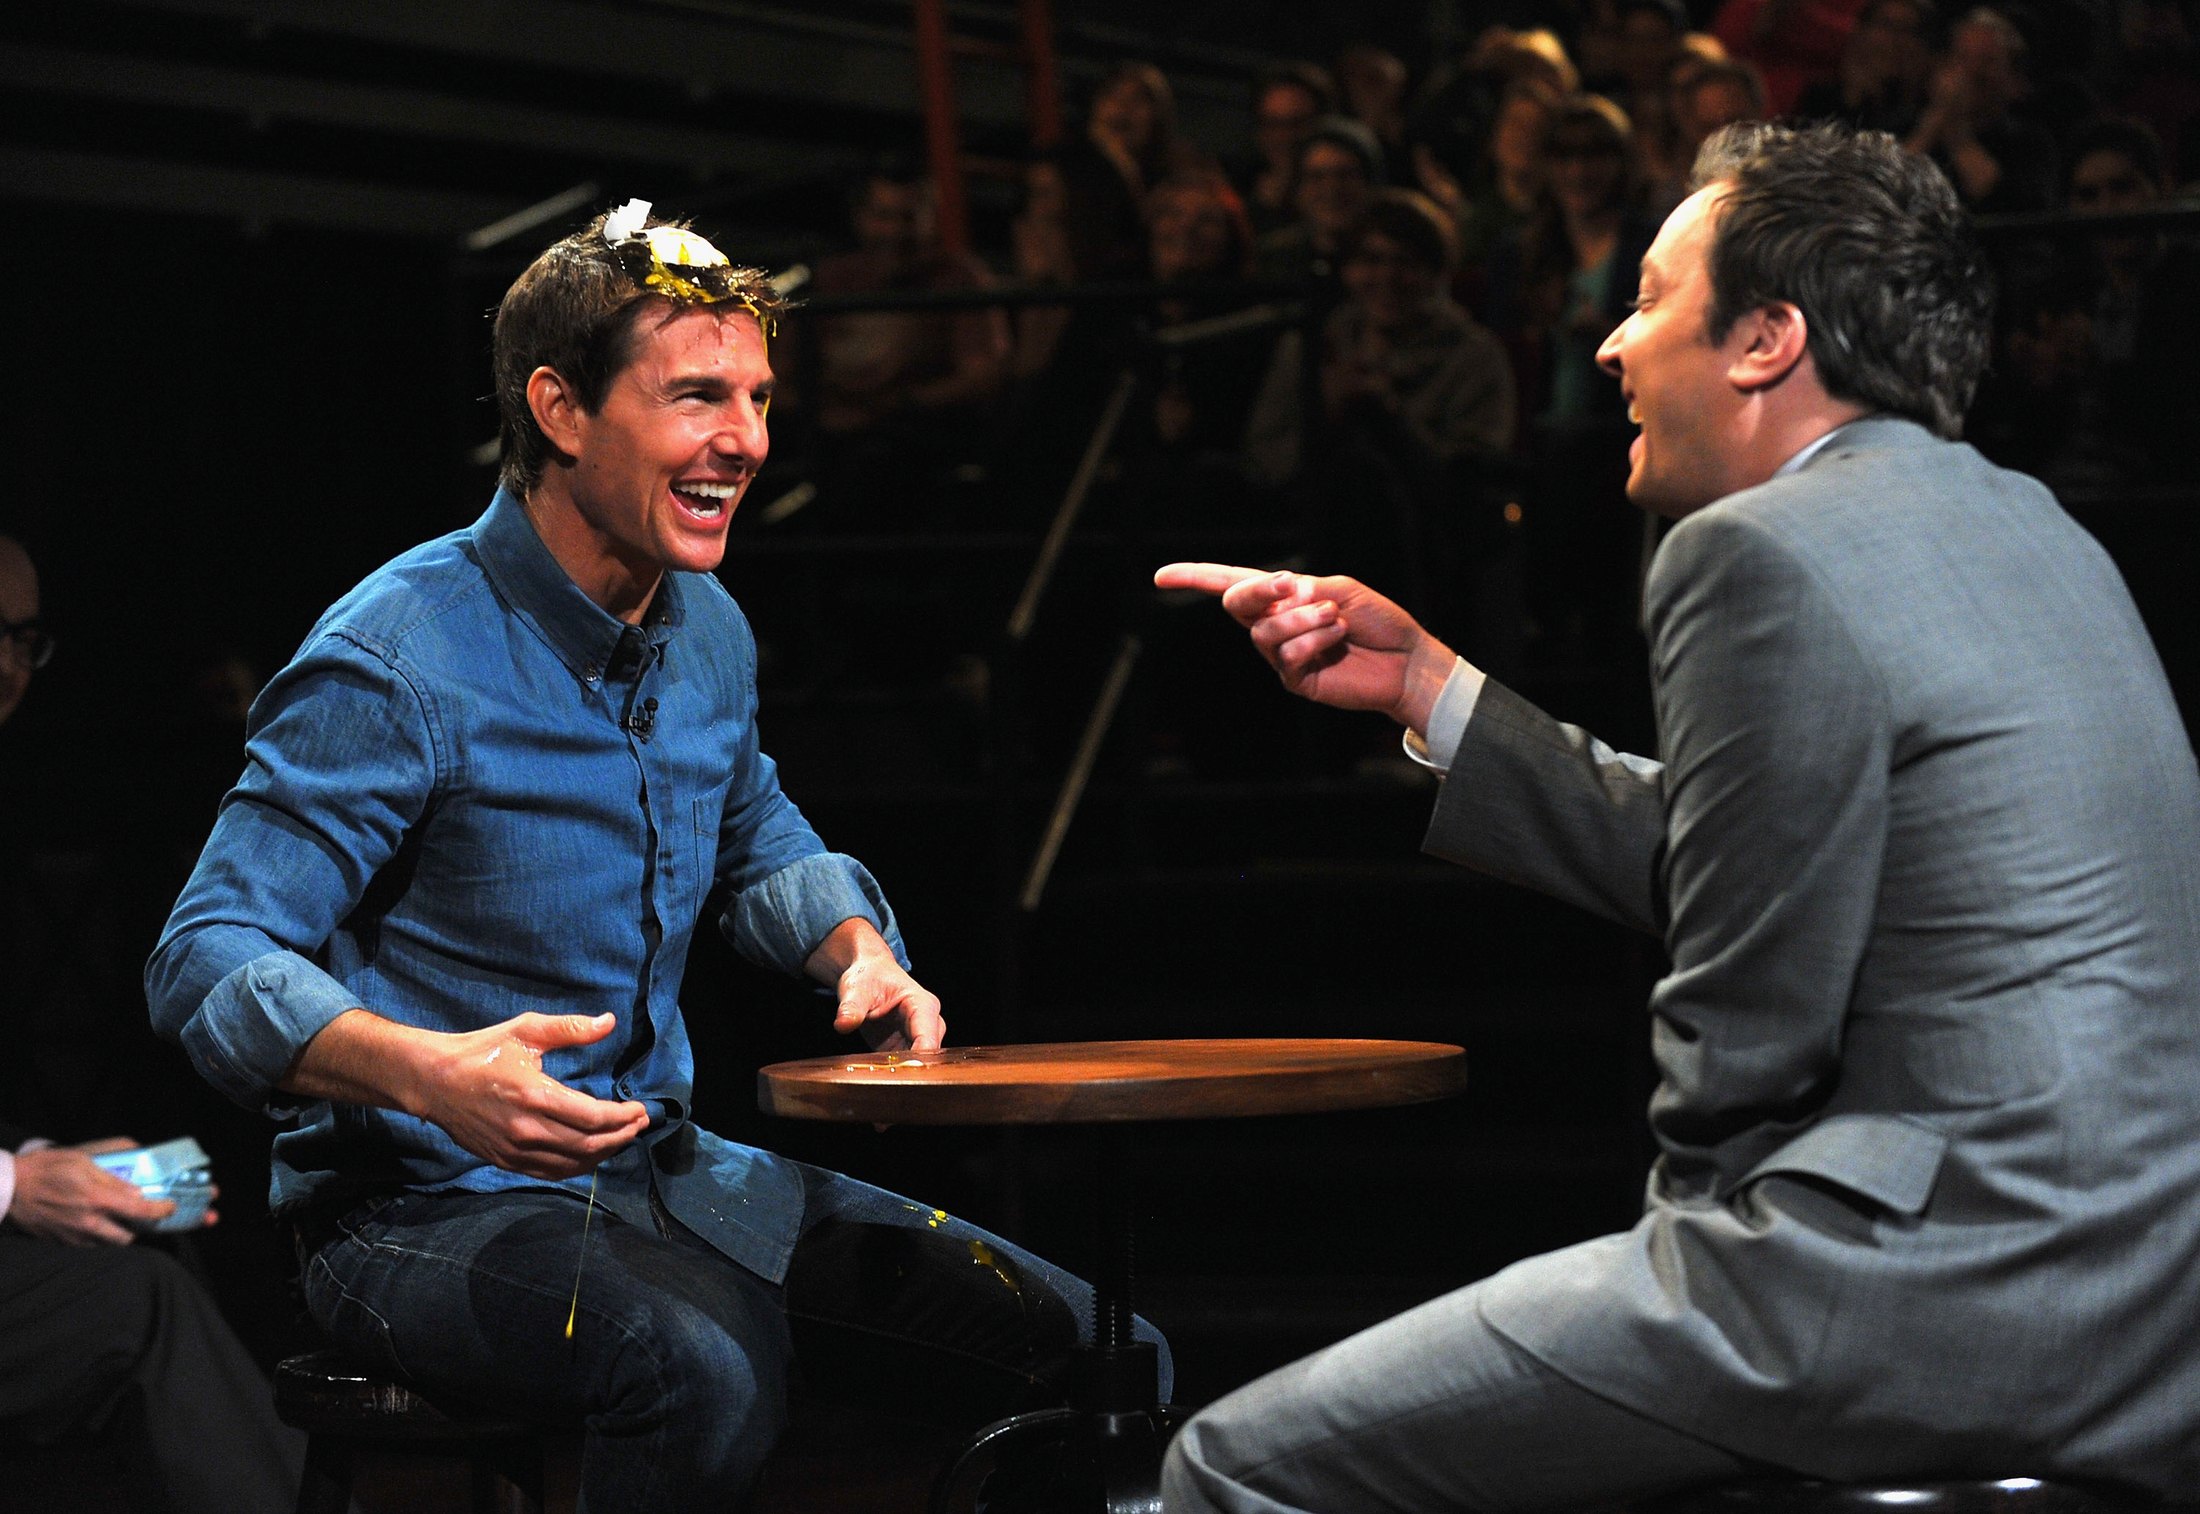 late-night-with-jimmy-fallon-april12-2013-009.jpg